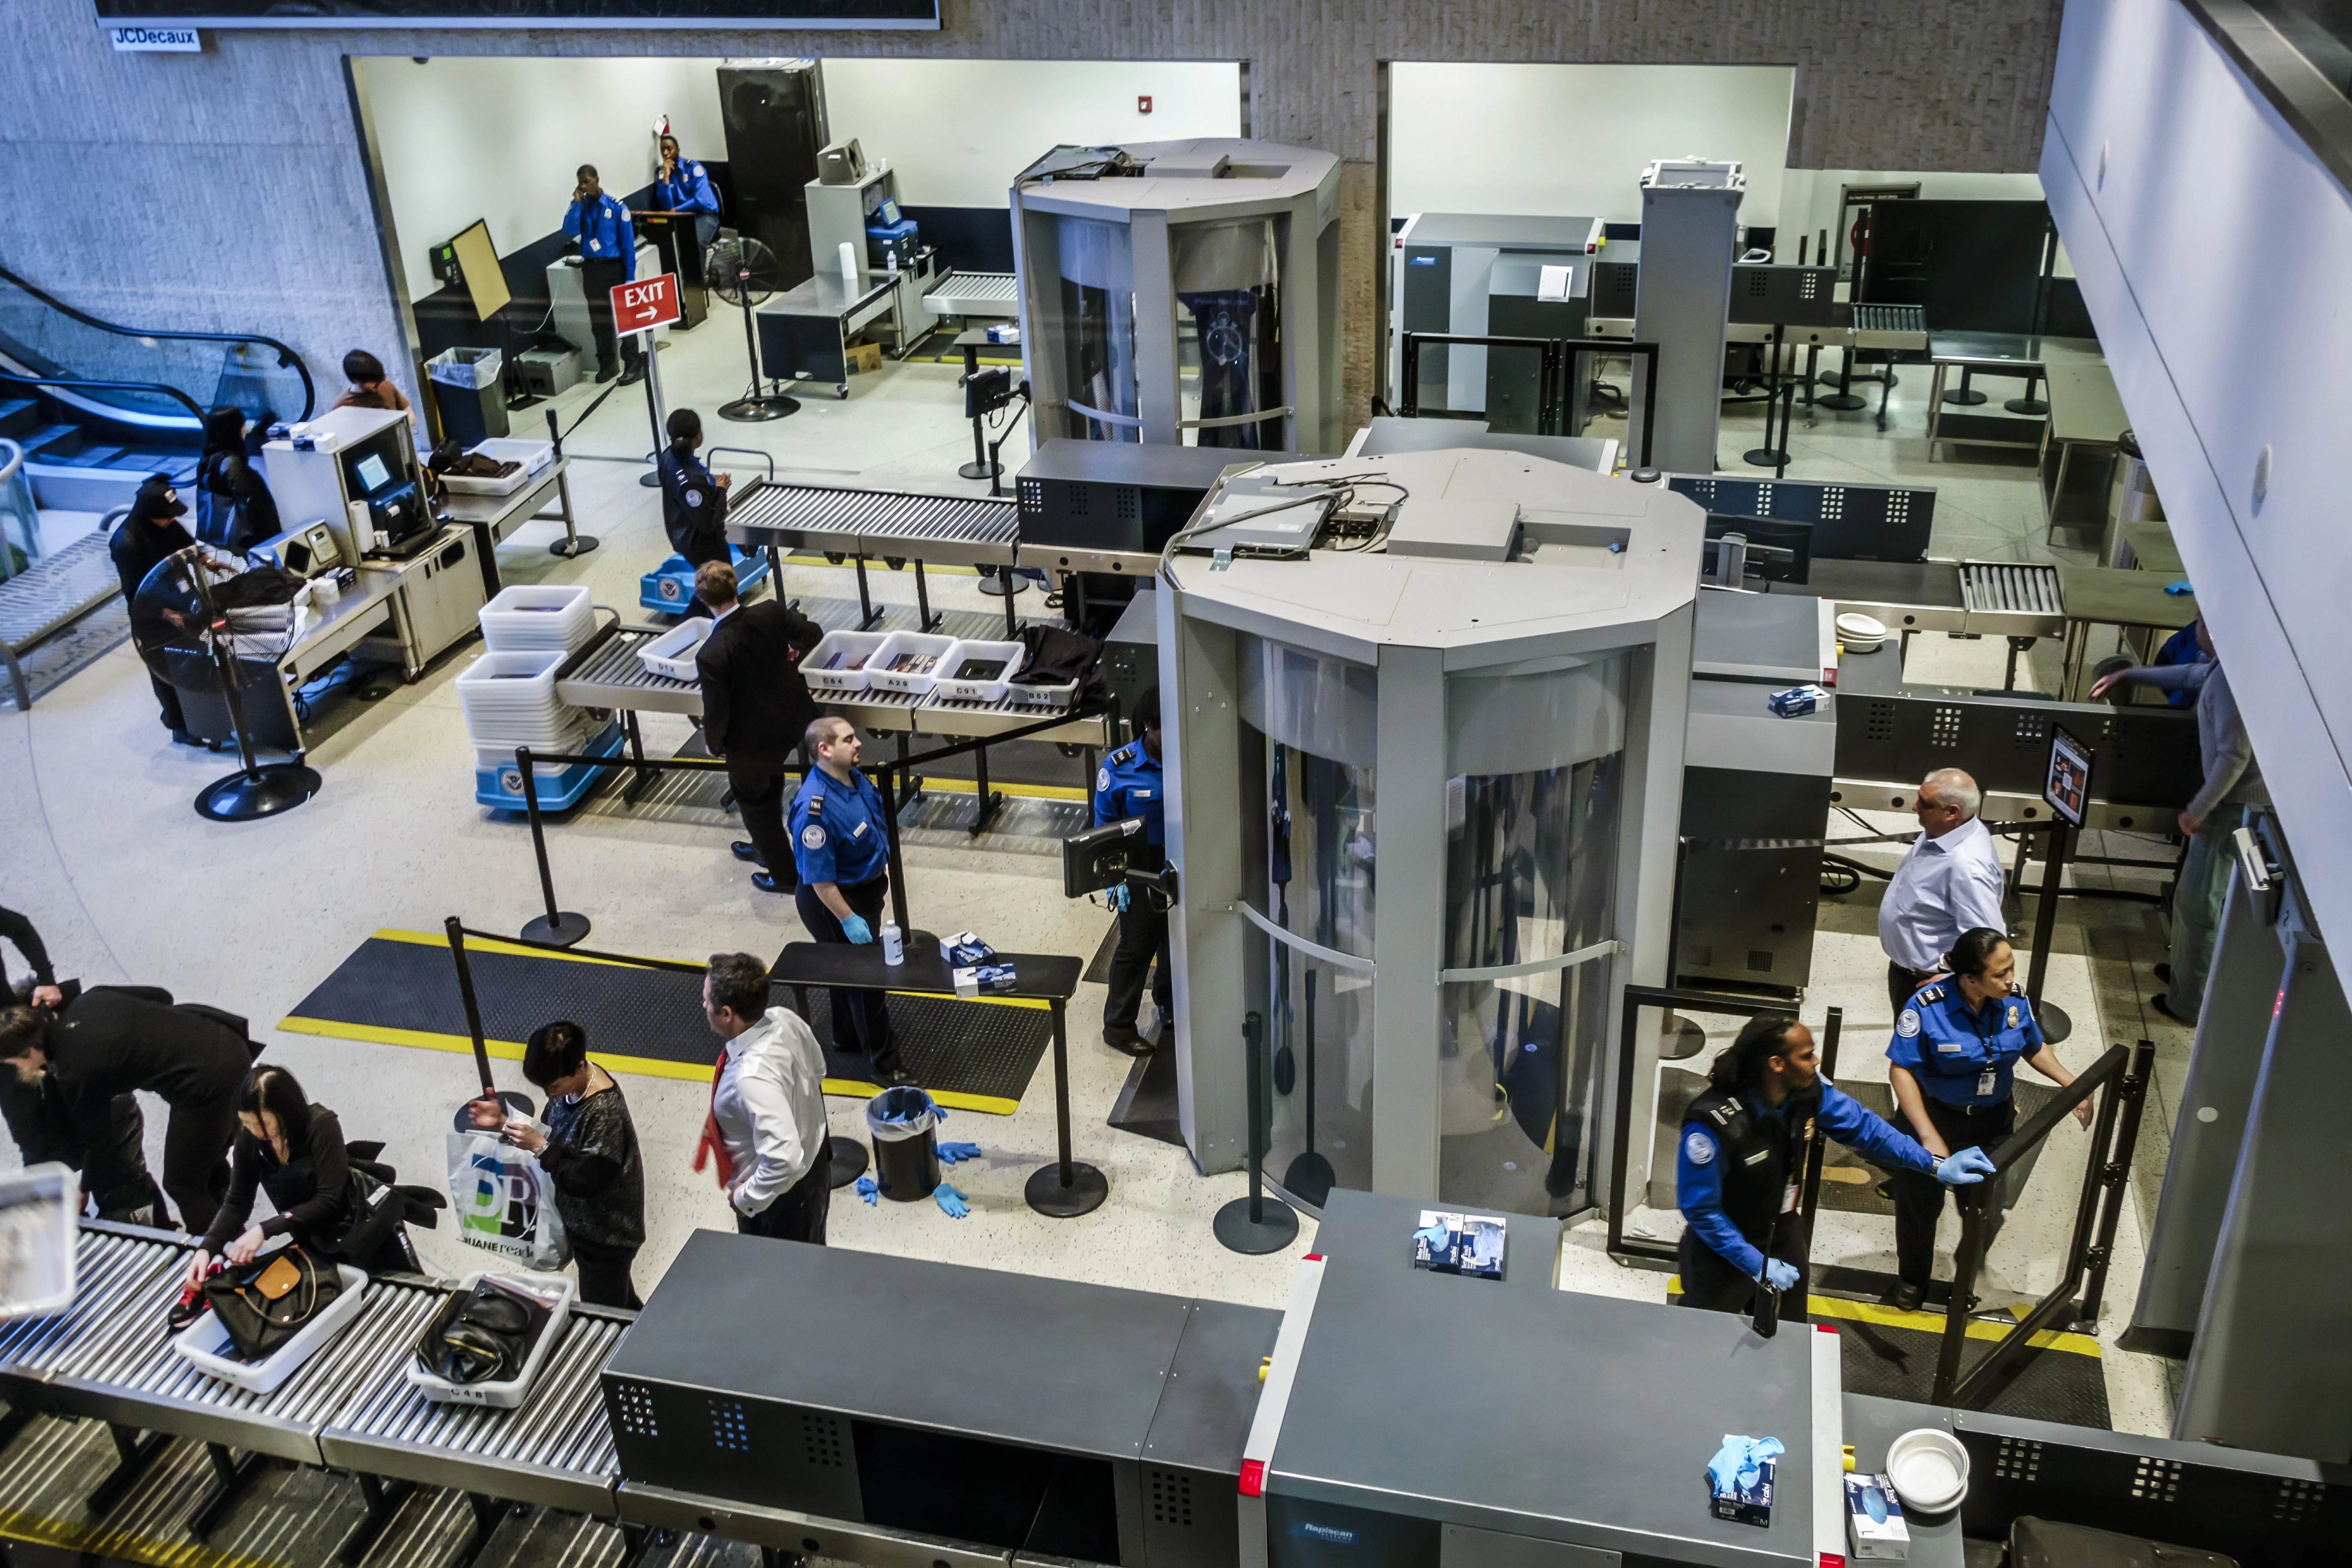 The security area at John F. Kennedy International Airport. (Photo by: Jeffrey Greenberg/Universal Images Group via Getty Images)